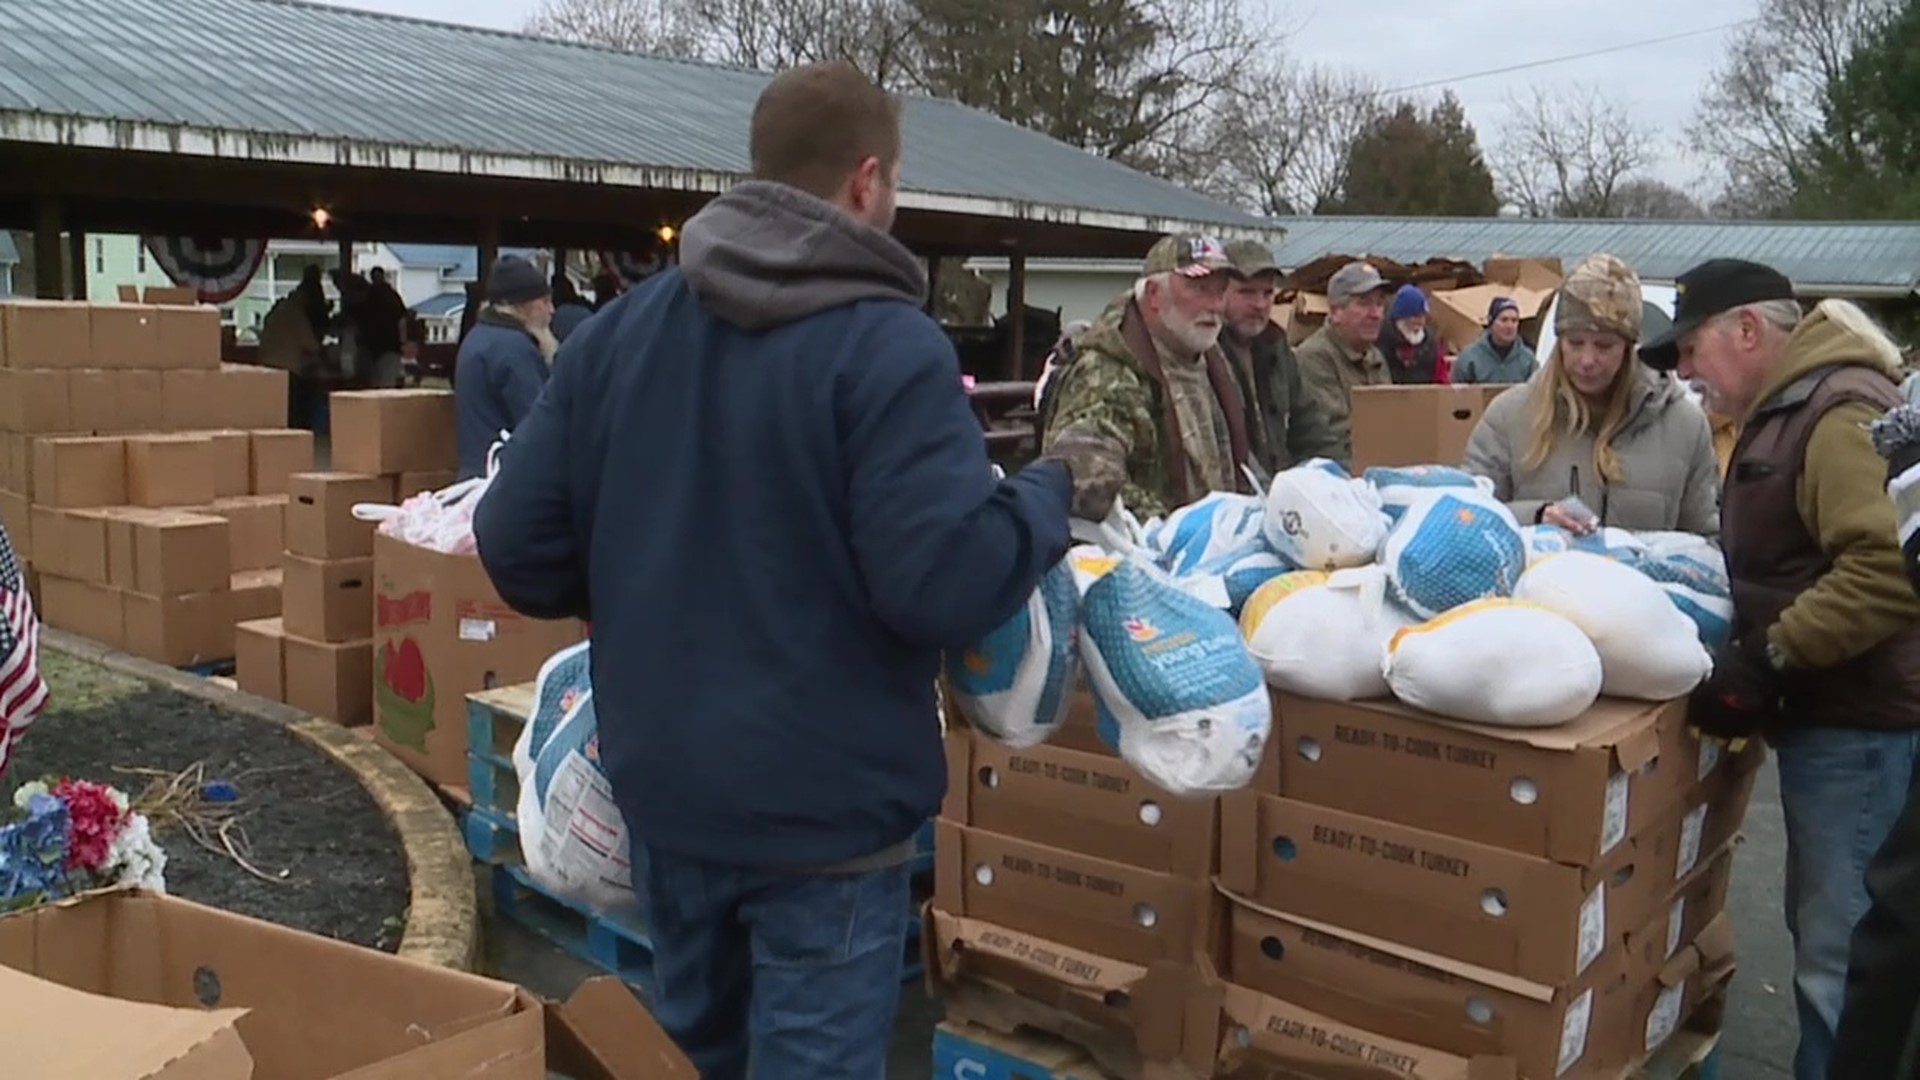 The holiday food distribution will feed 375 families.